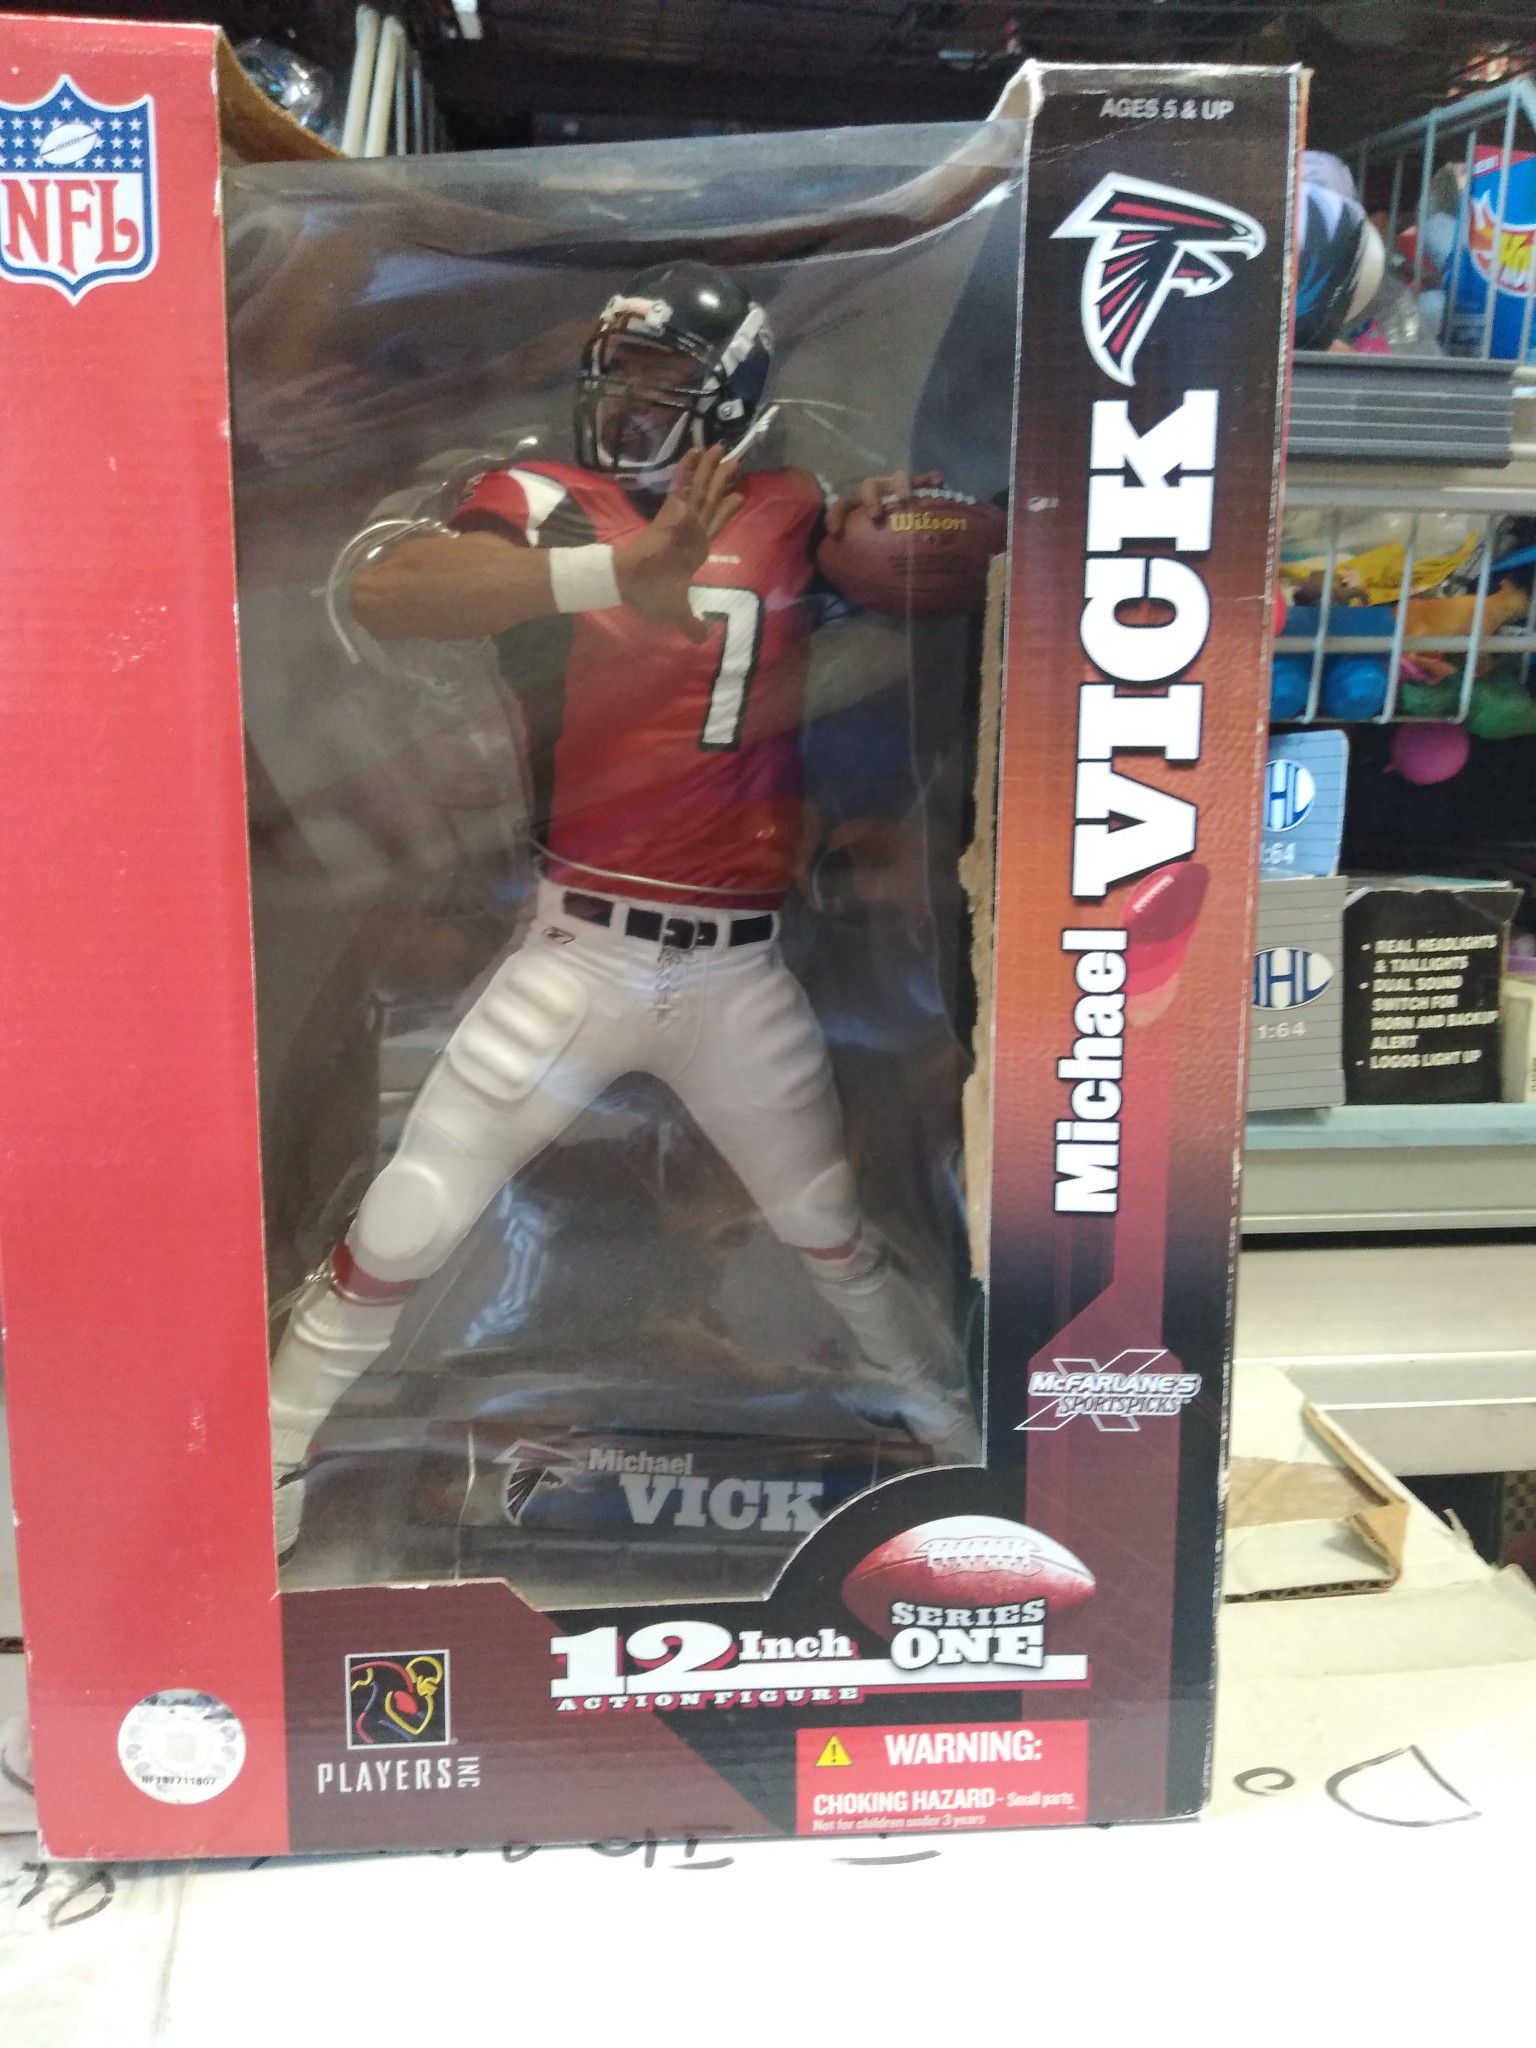 Collectible 12in series 1 action figure Michael Vick